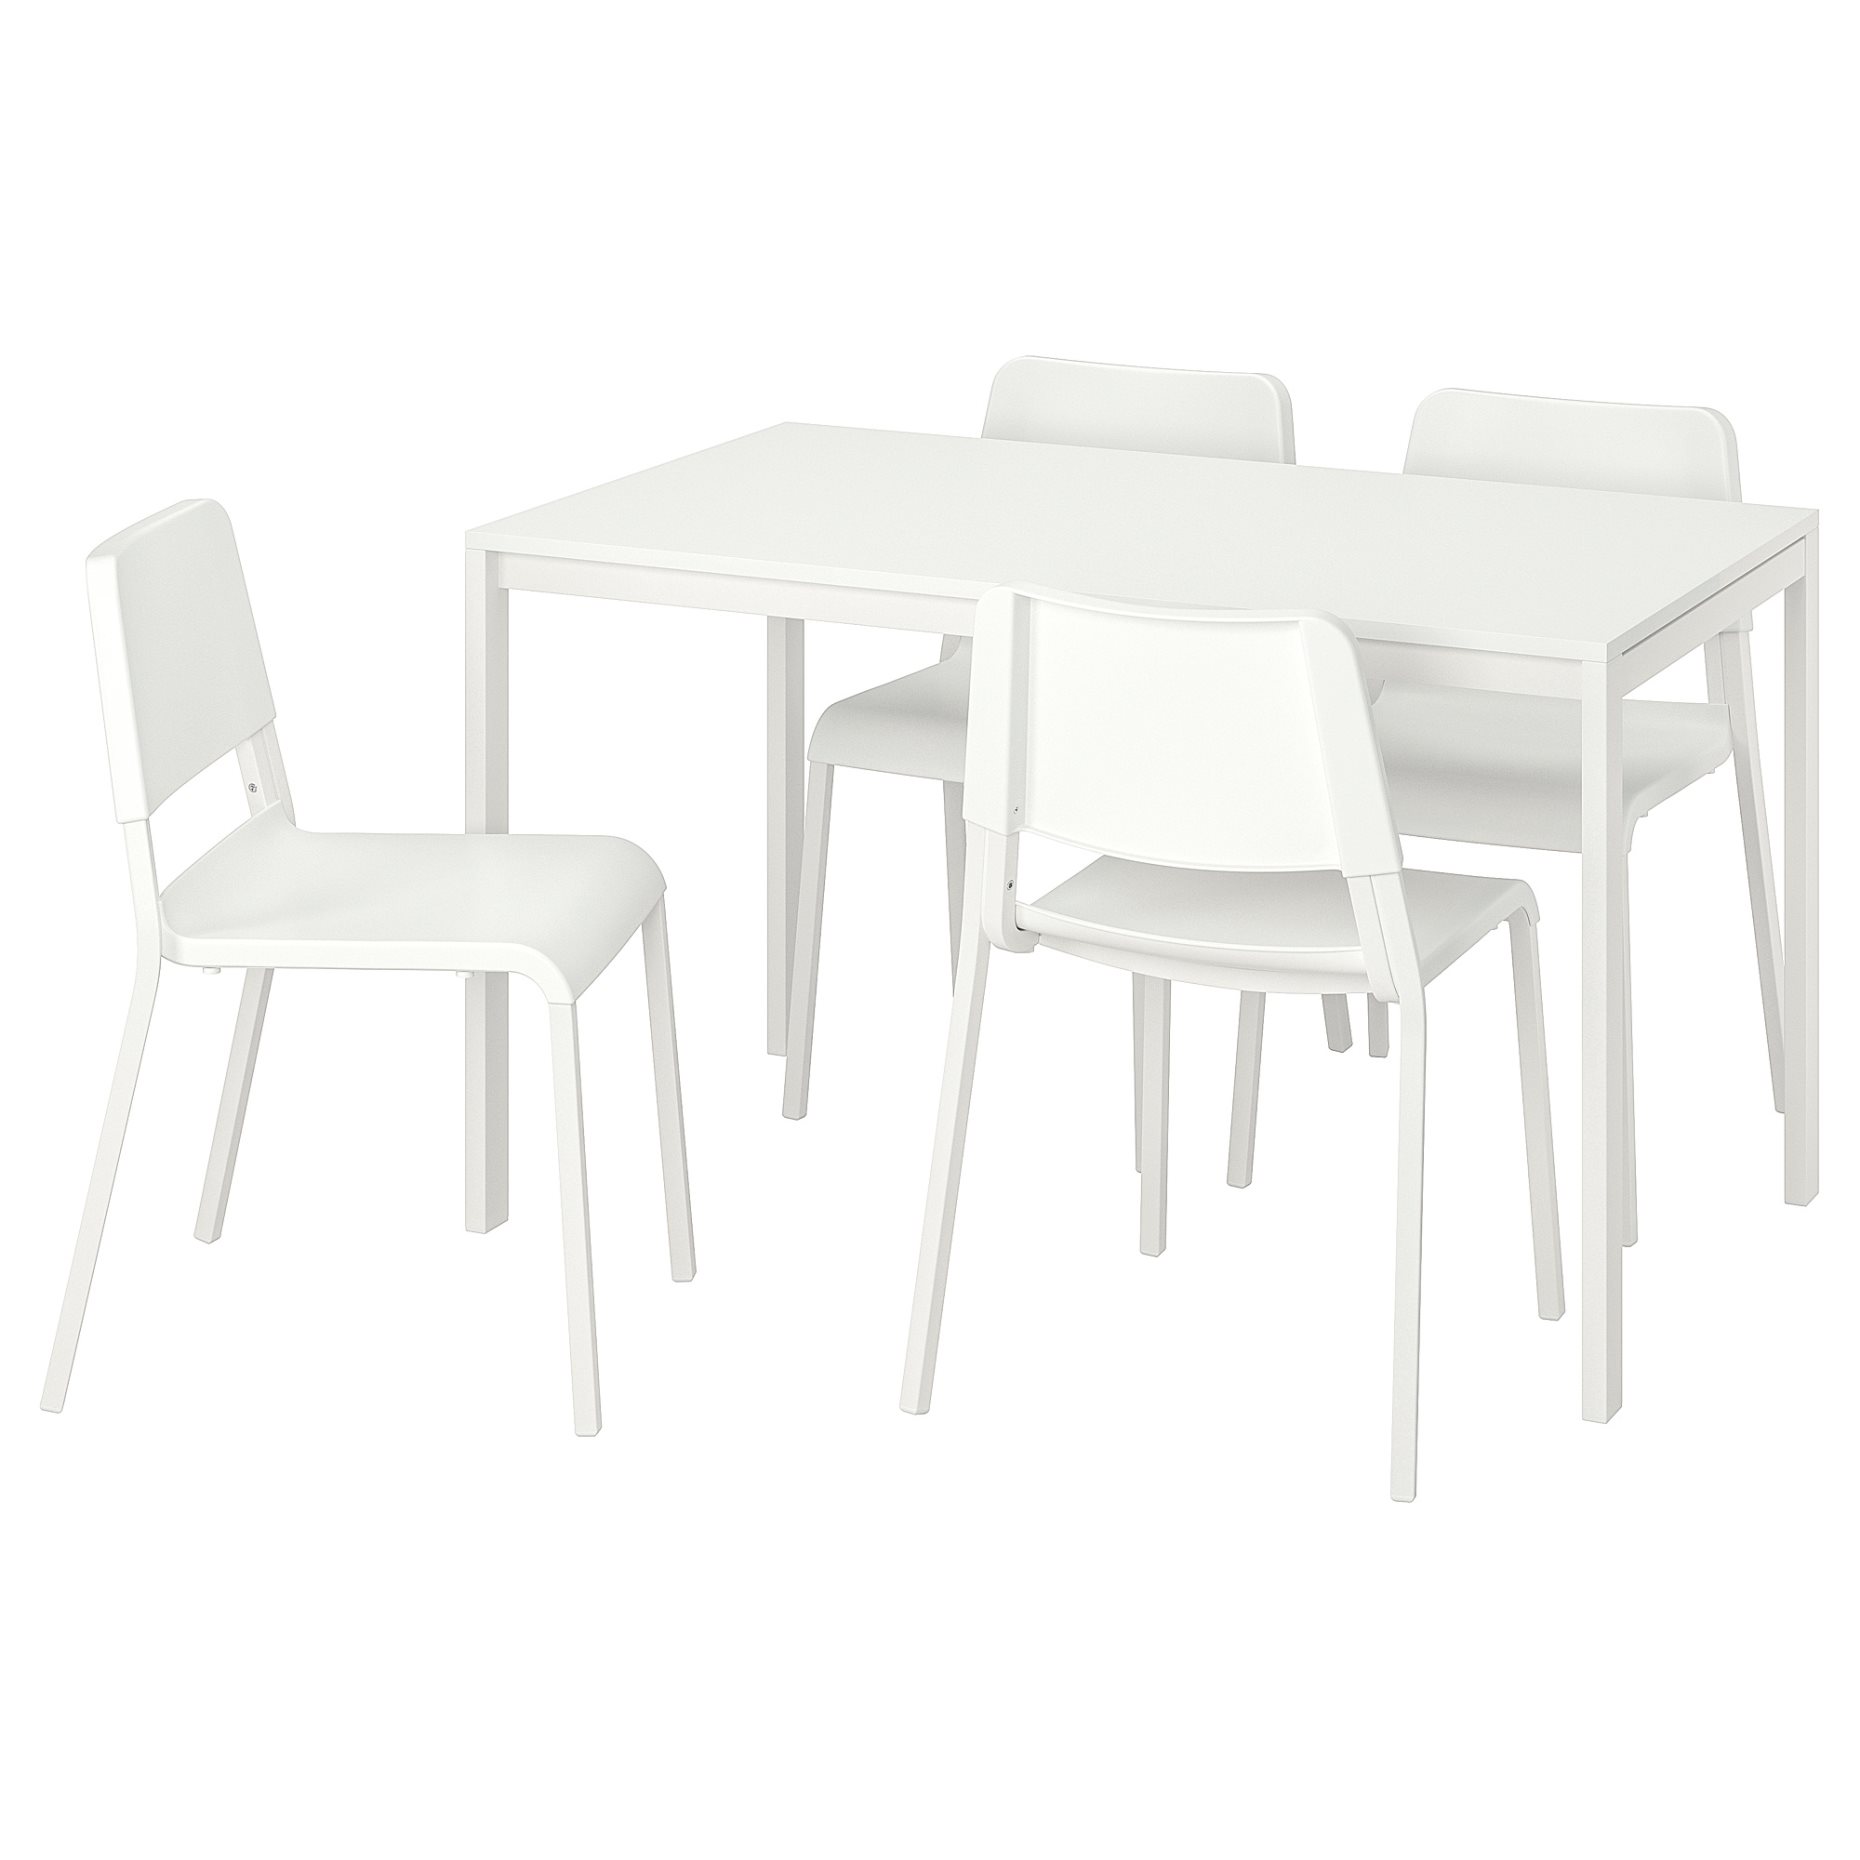 MELLTORP/TEODORES, table and 4 chairs, 292.212.56